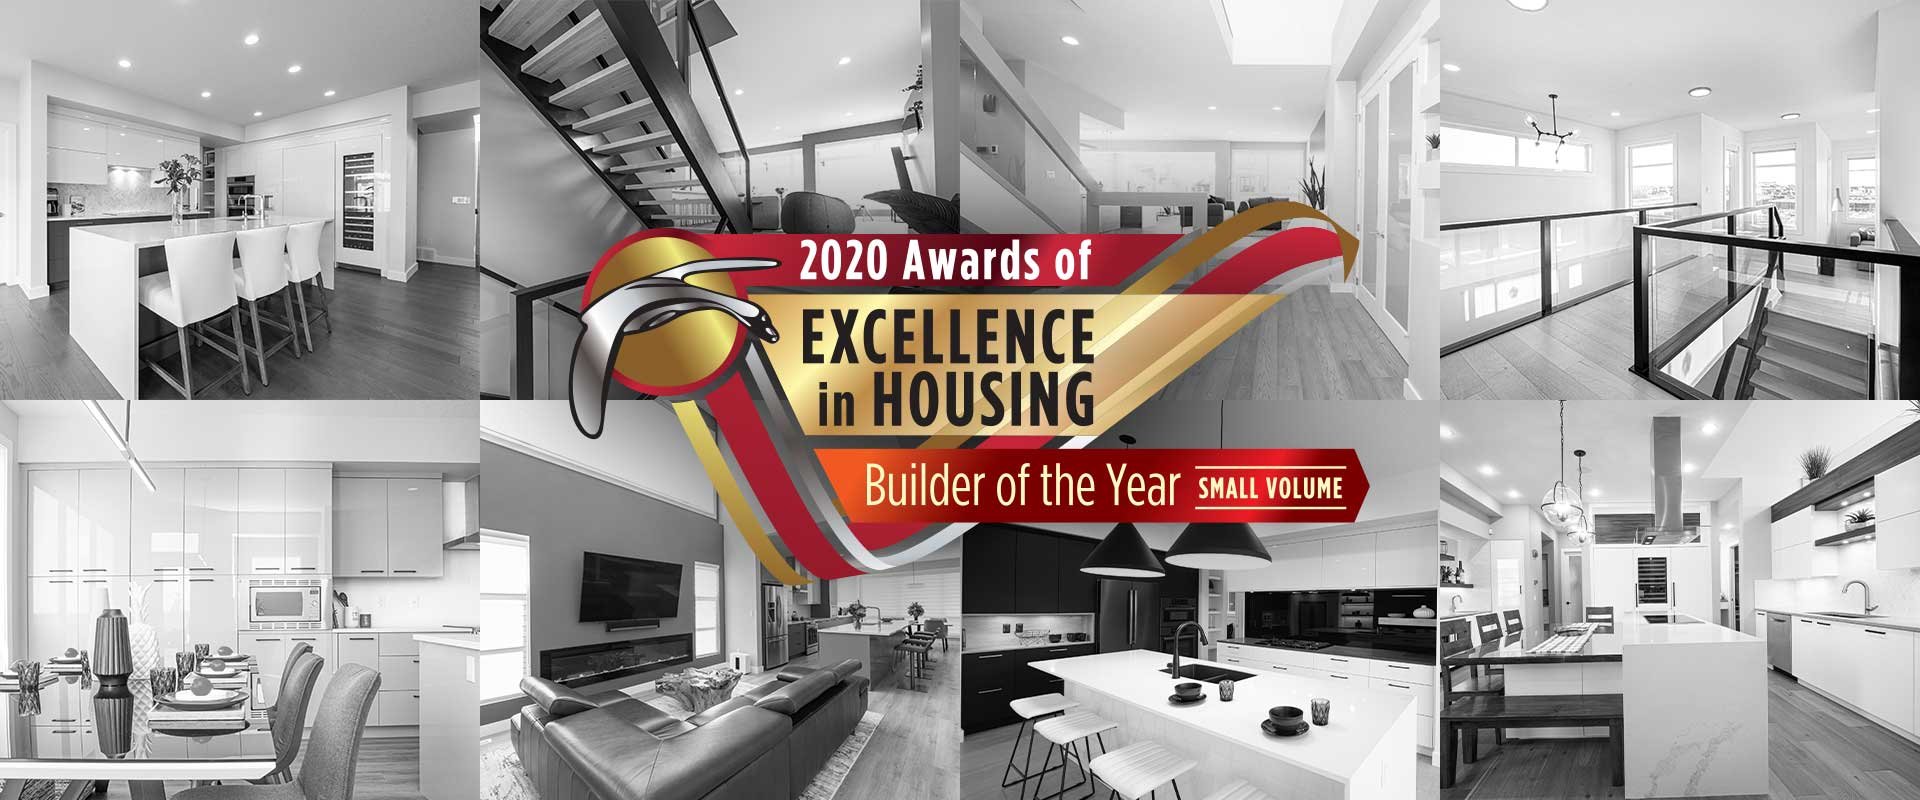 Home-builder-awards-builder-of-the-year-2020_Canadian_Home_Builders_Association_Award_Winners